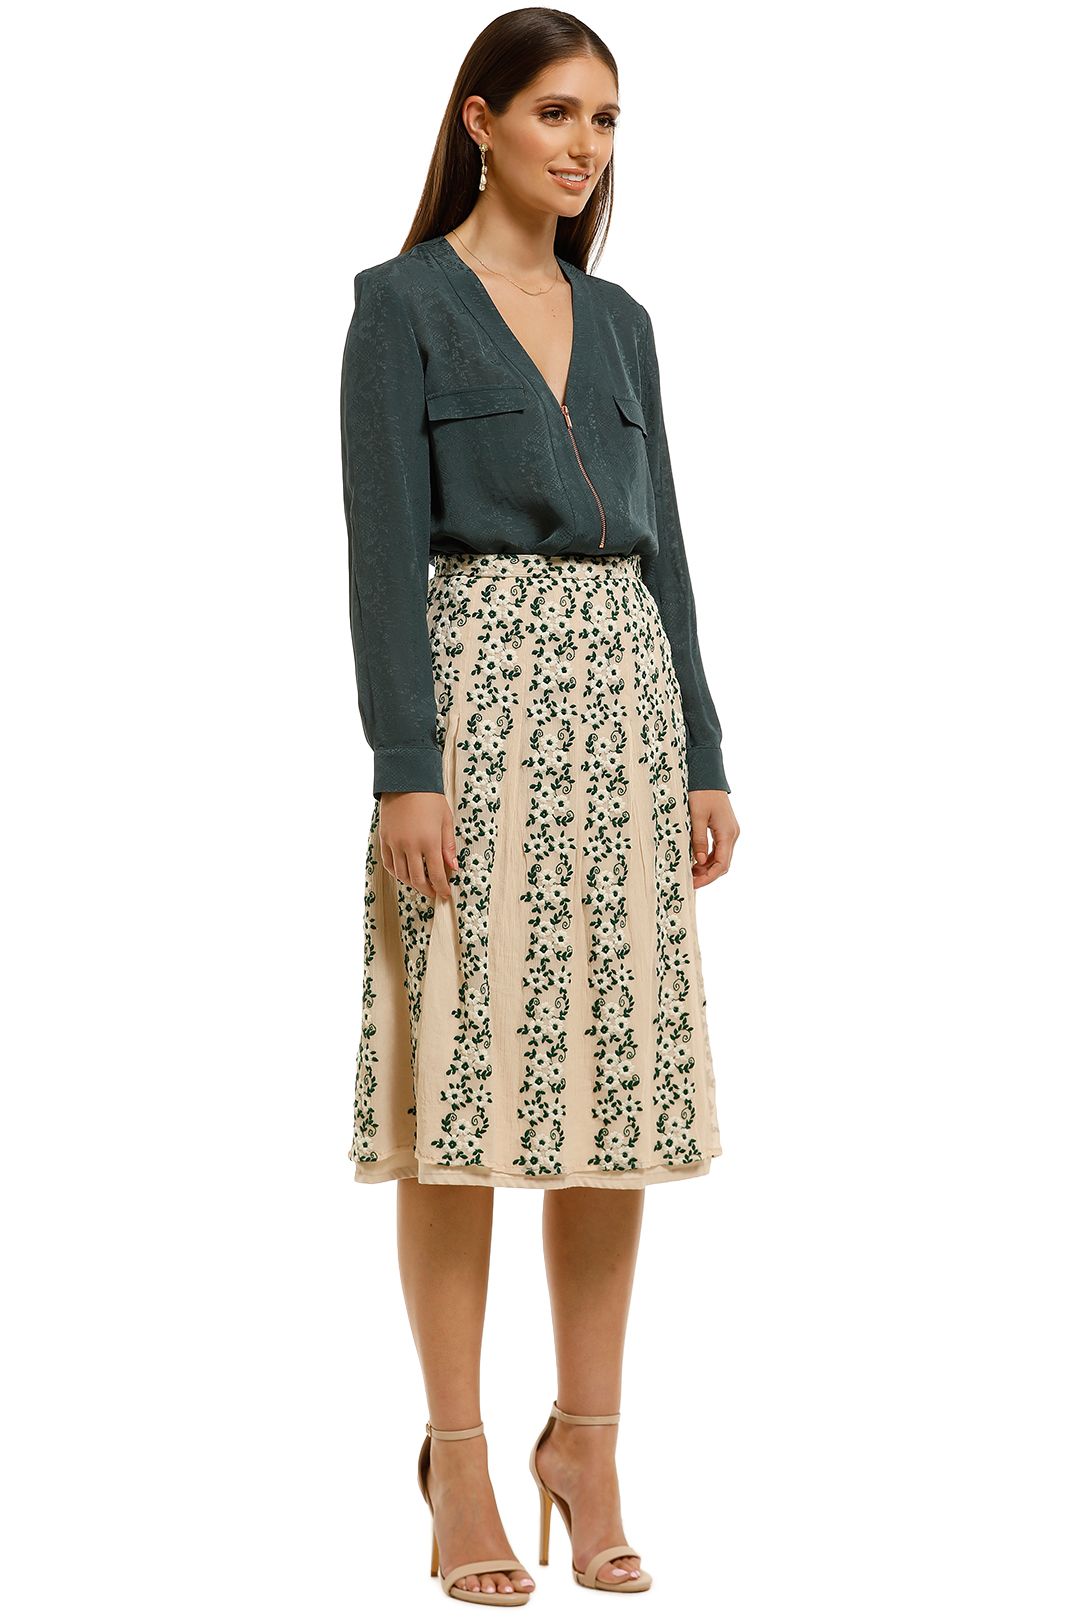 Moss-and-Spy-Daisy-Skirt-Embroidered-Floral-Side